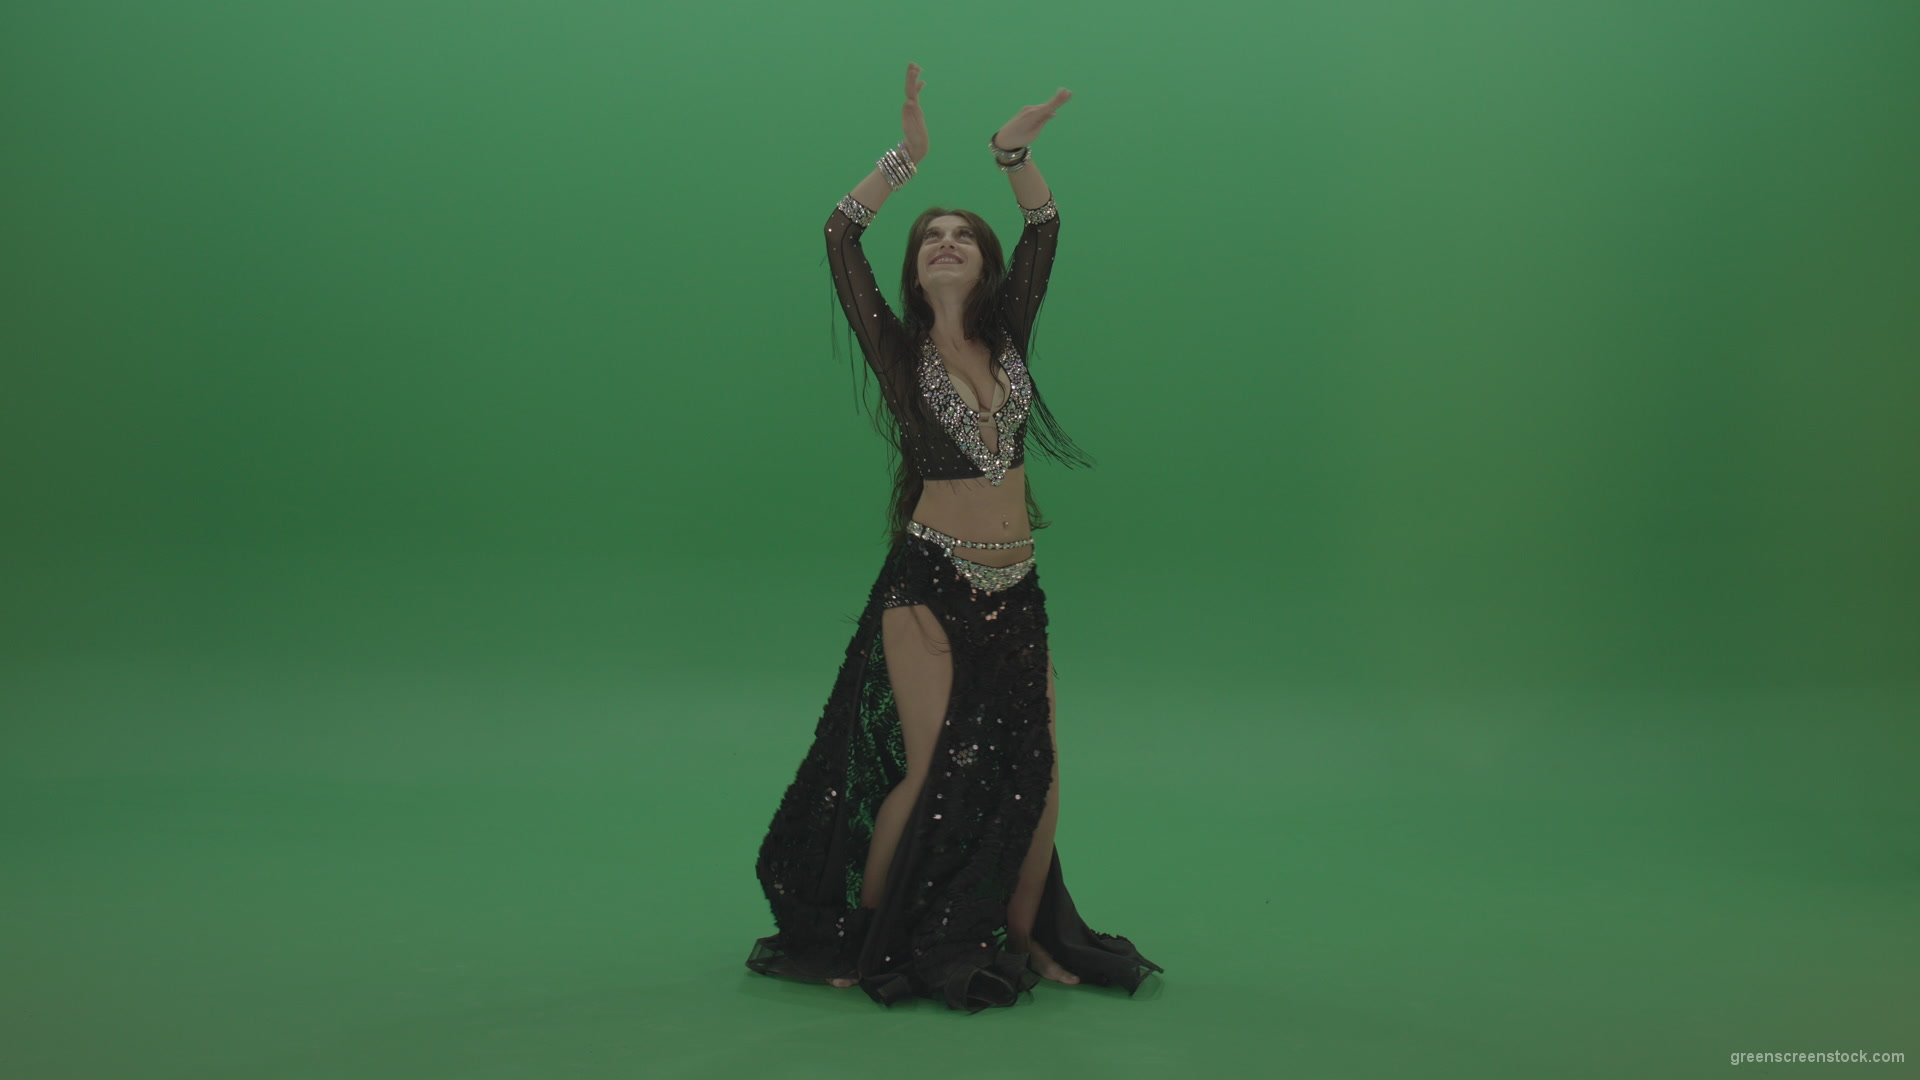 Adorable-belly-dancer-in-black-wear-display-amazing-dance-moves-over-chromakey-background_005 Green Screen Stock